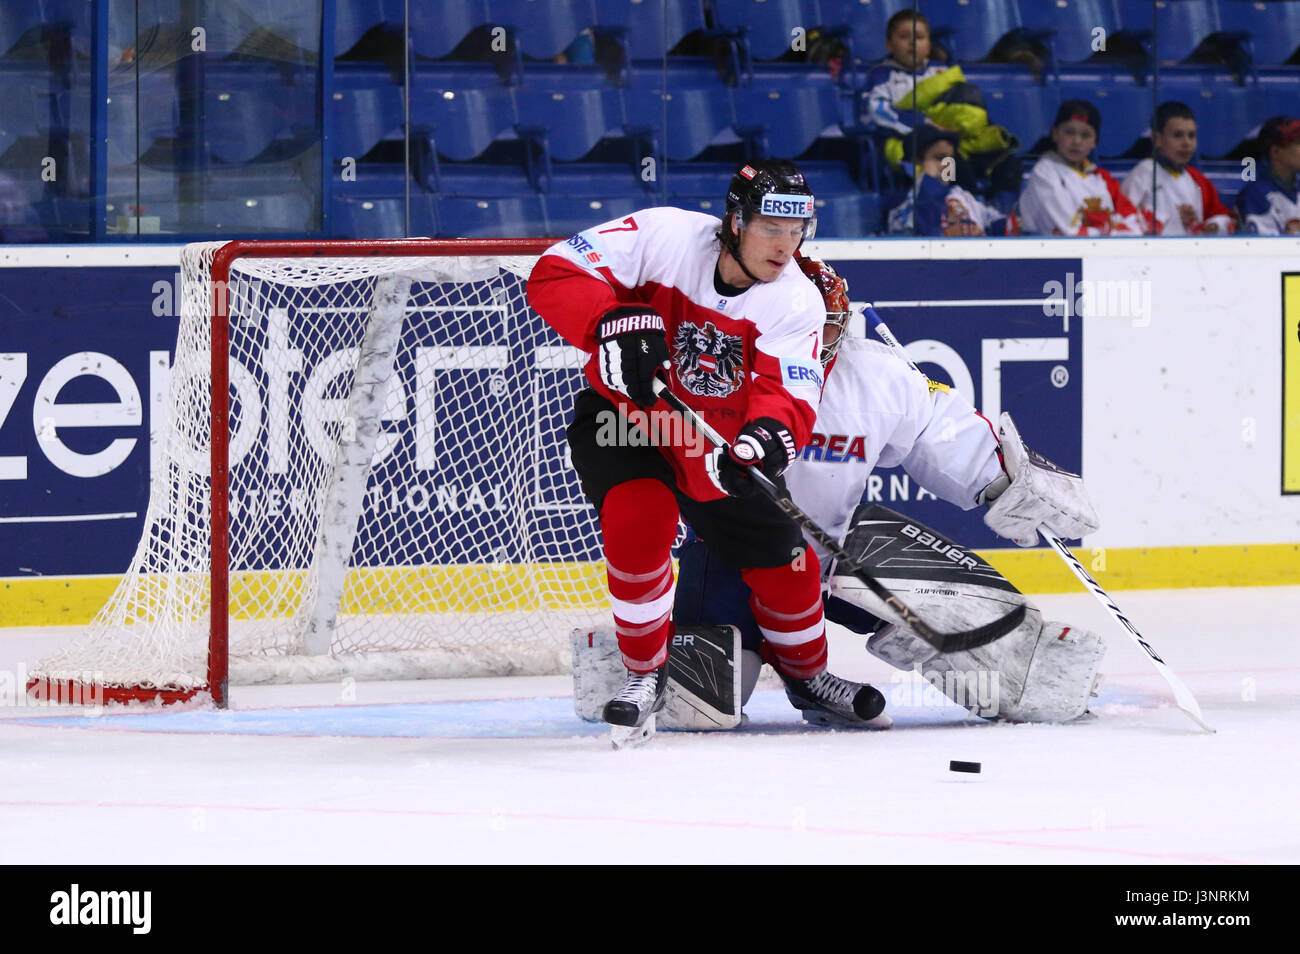 KYIV, UKRAINE - APRIL 27, 2017: Forward Brian LEBLER of Austria and goalkeeper PARK Sungje of South Korea in action during their IIHF 2017 Ice Hockey  Stock Photo